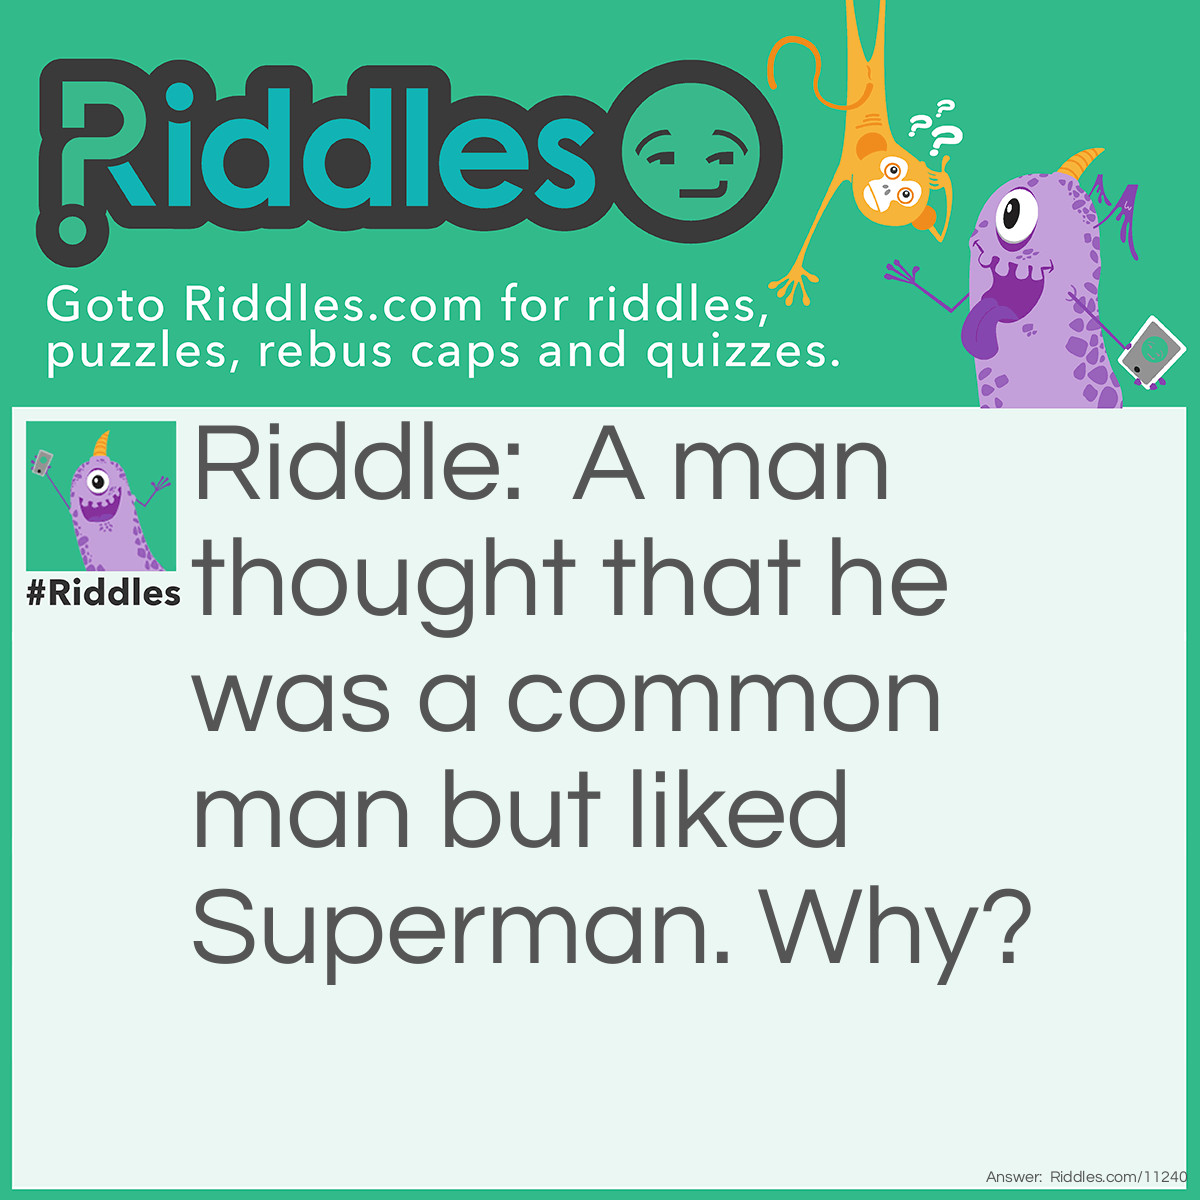 Riddle: A man thought that he was a common man but liked Superman. Why? Answer: Once in the summer while going to the market he thought if he was a Superman, he could work faster.